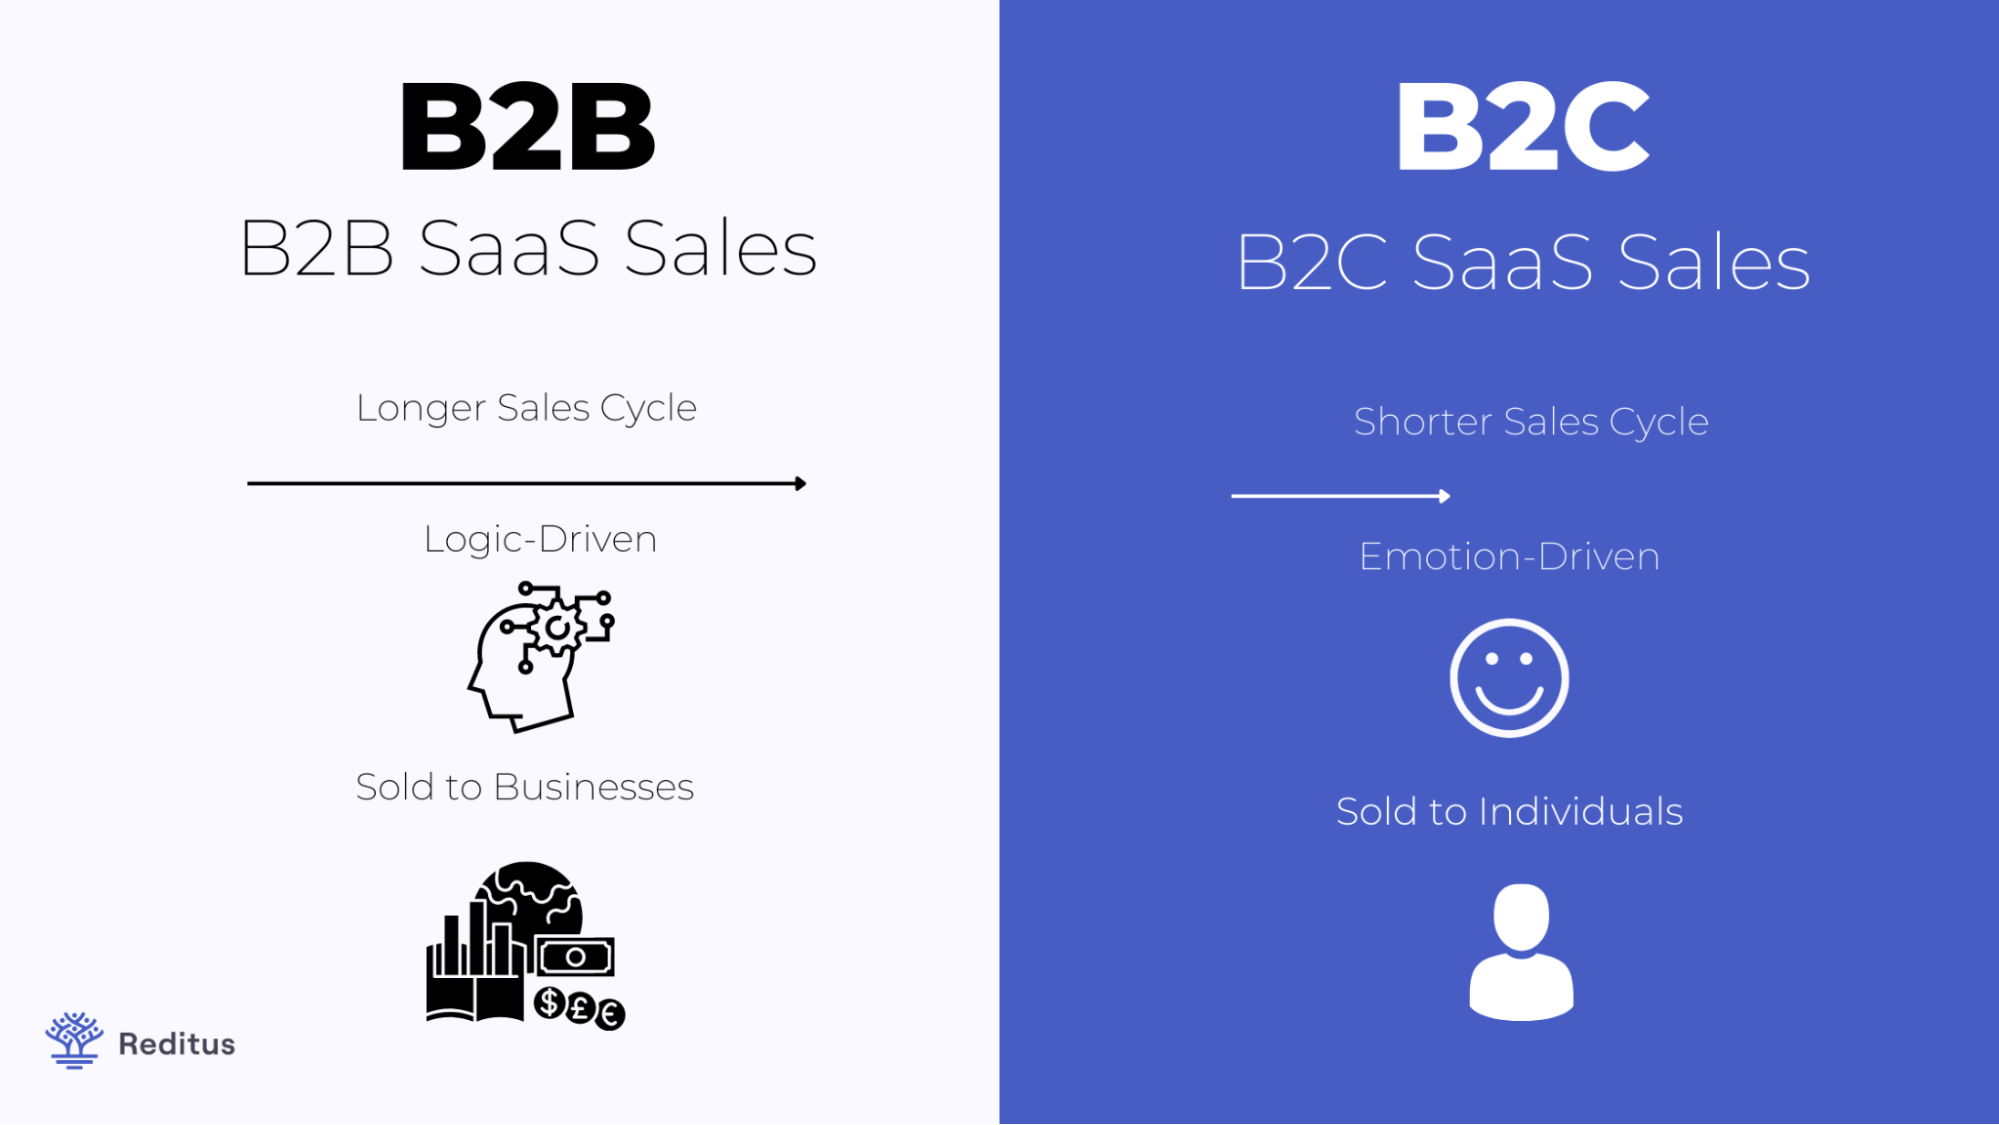 Visual Representation of the Differences Between Selling B2B and B2C SaaS Services